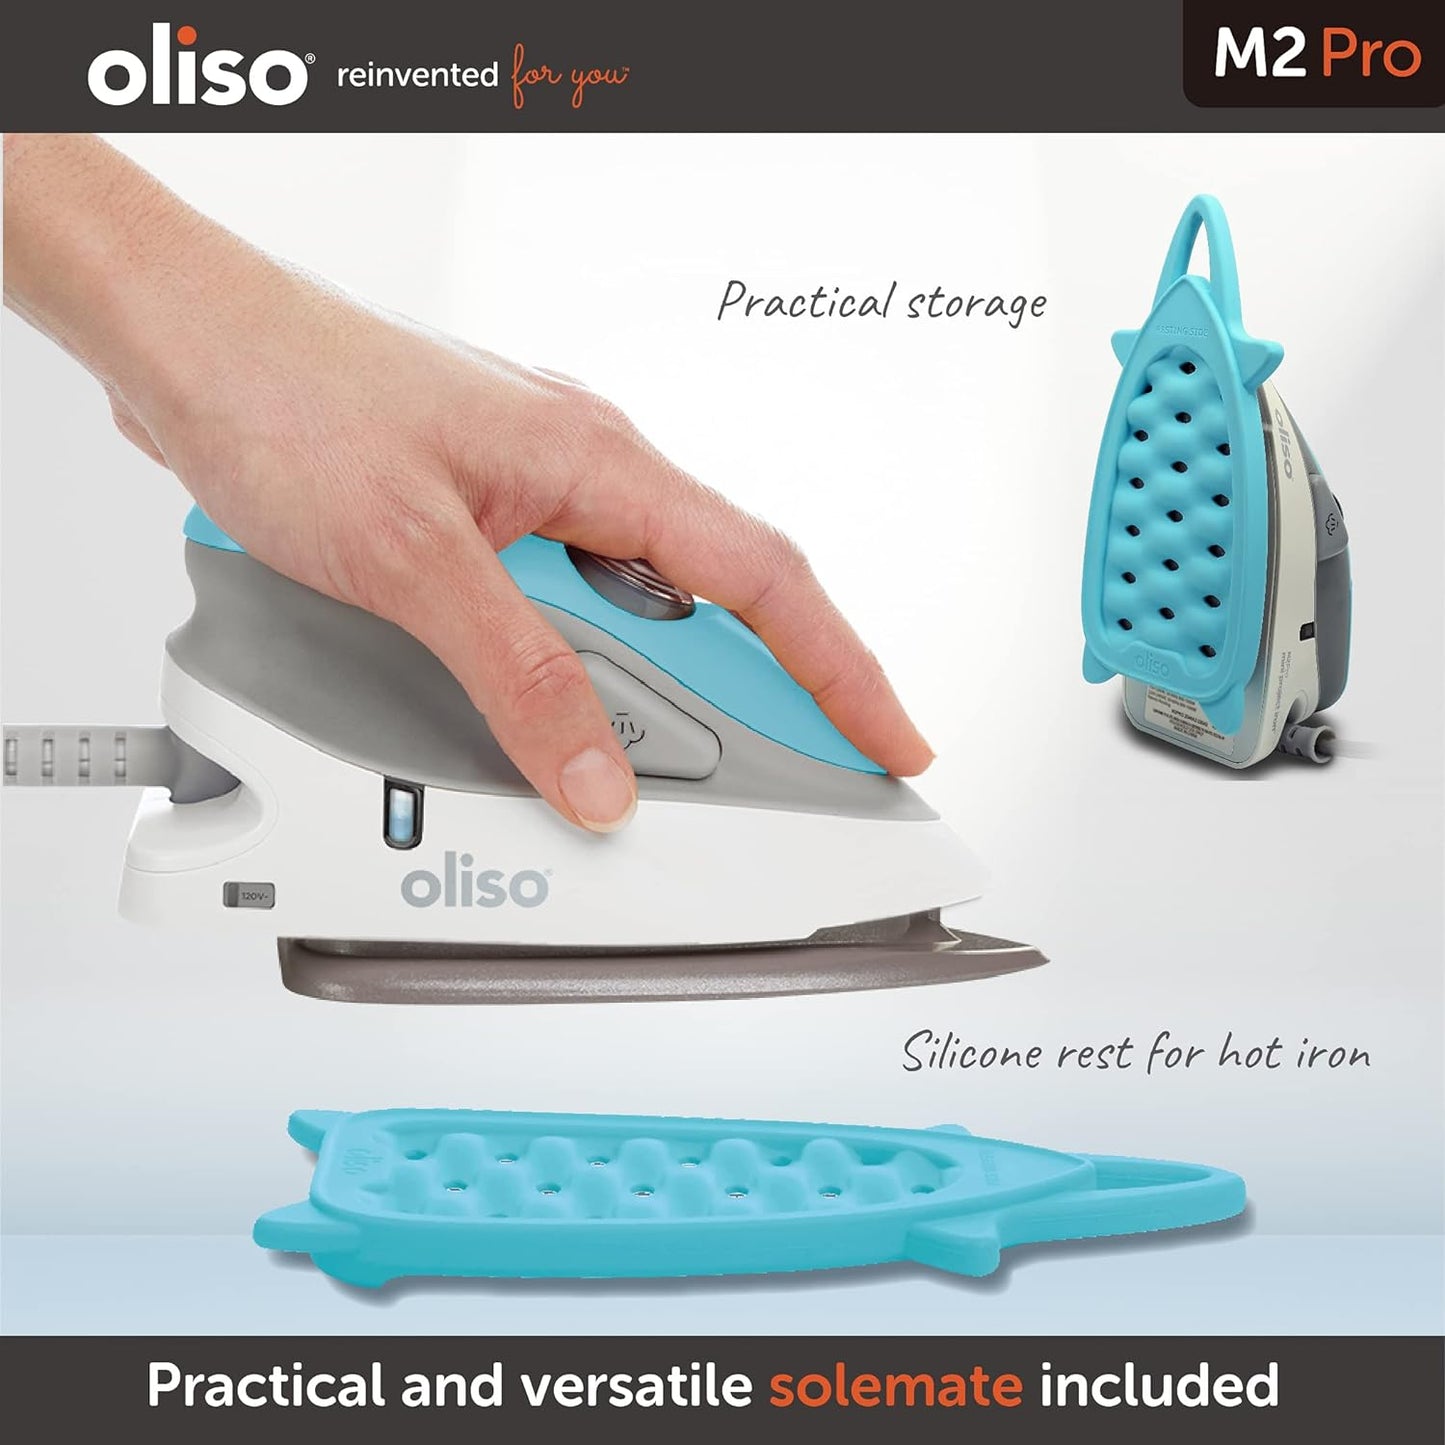 Product ImageProduct ImageProduct ImageProduct Image  OLISO M3Pro Project Iron - Teal